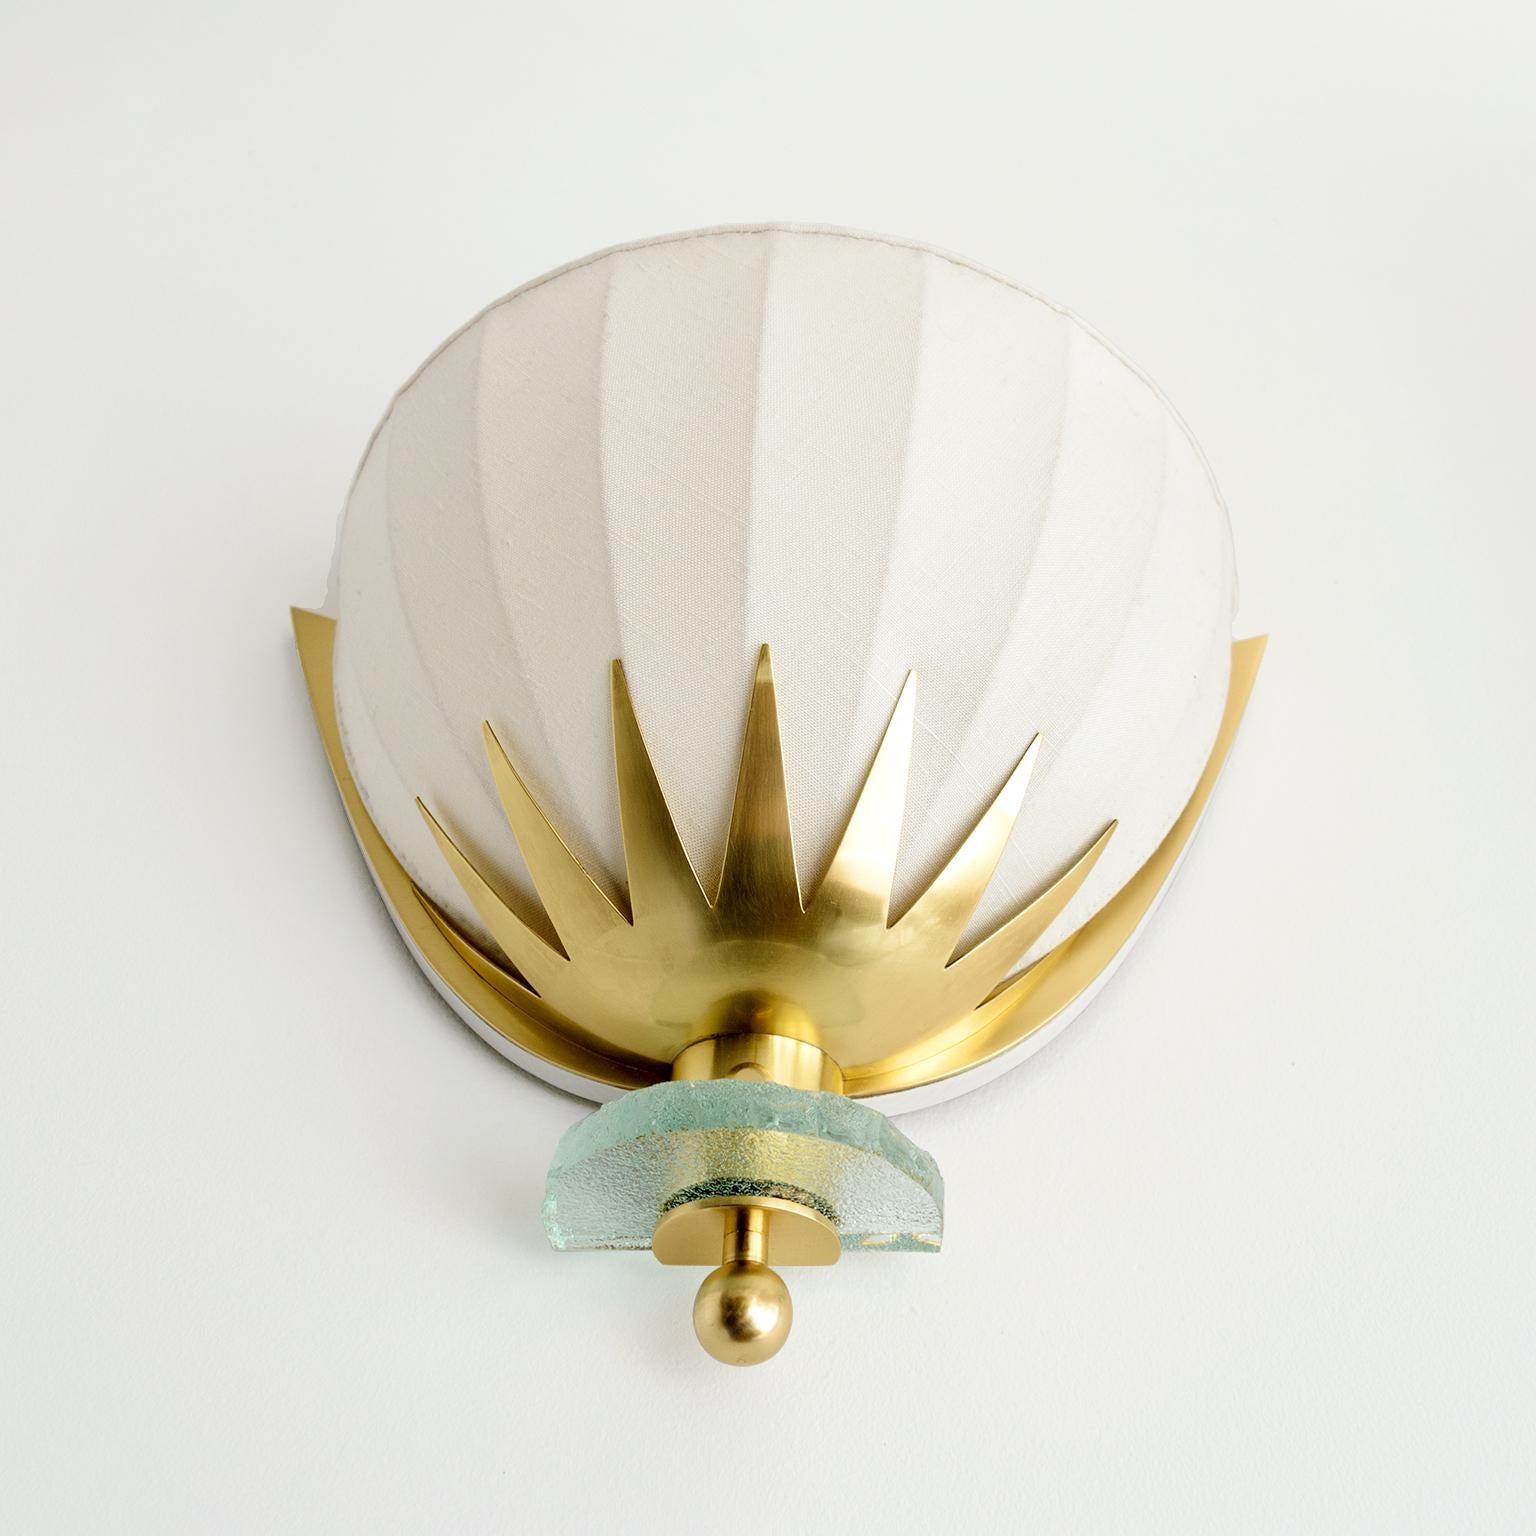 Swedish Art Deco, Scandinavian Modern Brass and Glass Sconces with Fabric Shades 1